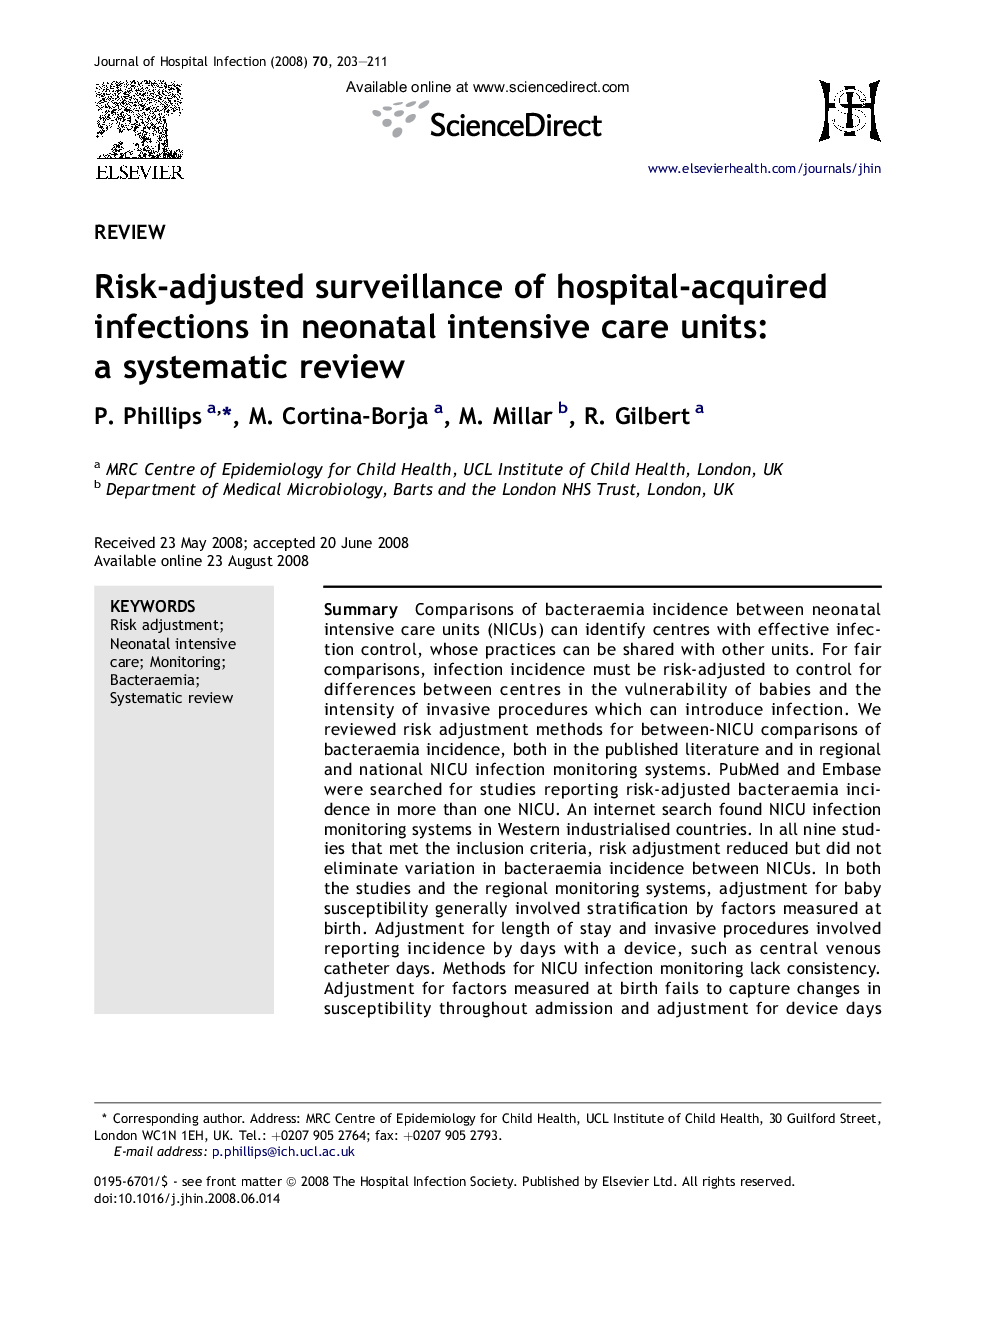 Risk-adjusted surveillance of hospital-acquired infections in neonatal intensive care units: a systematic review